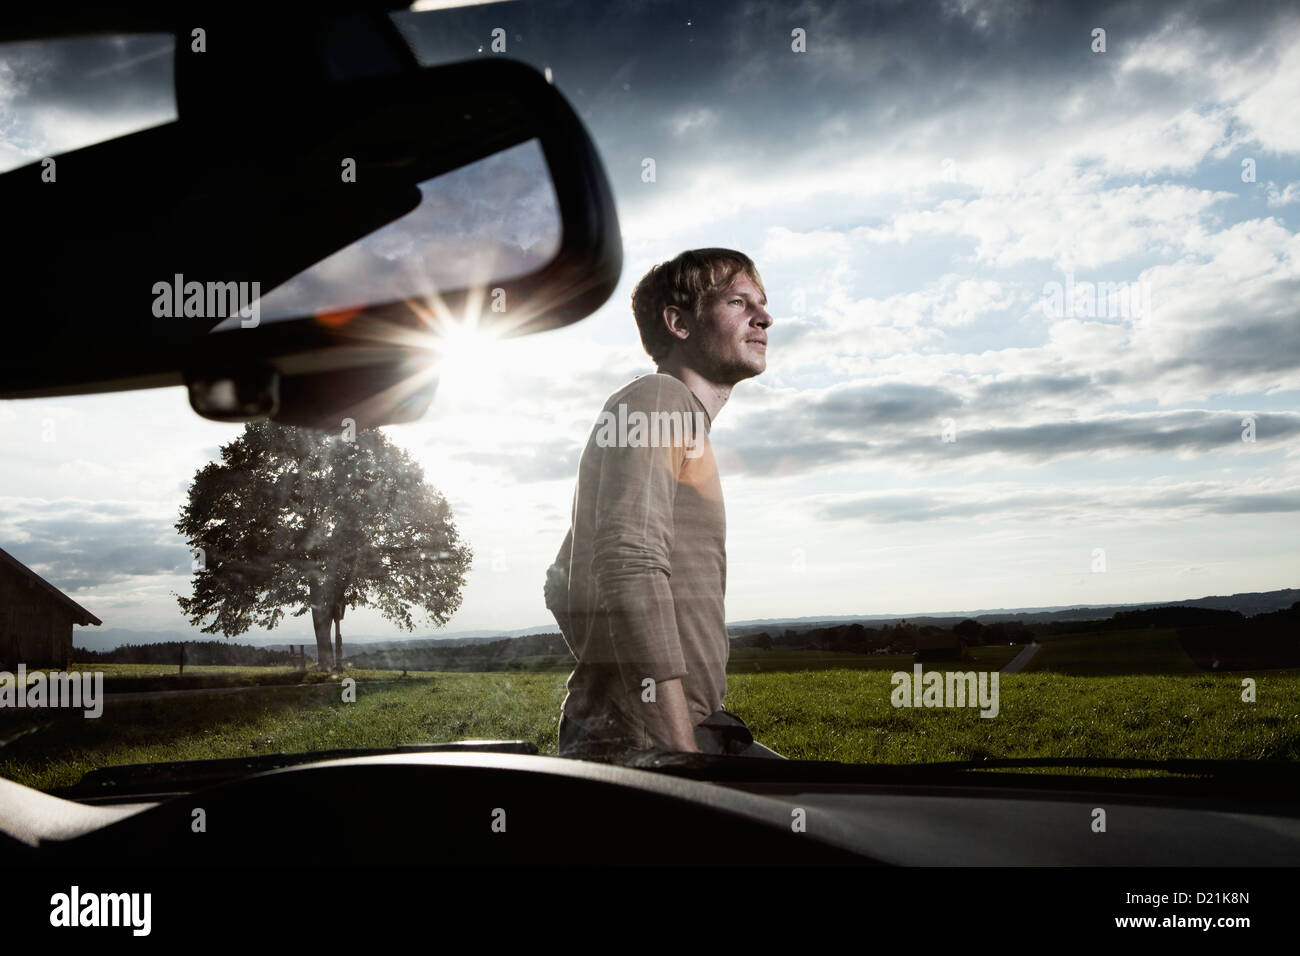 Germany, Bavaria, Mid adult man standing by car Stock Photo